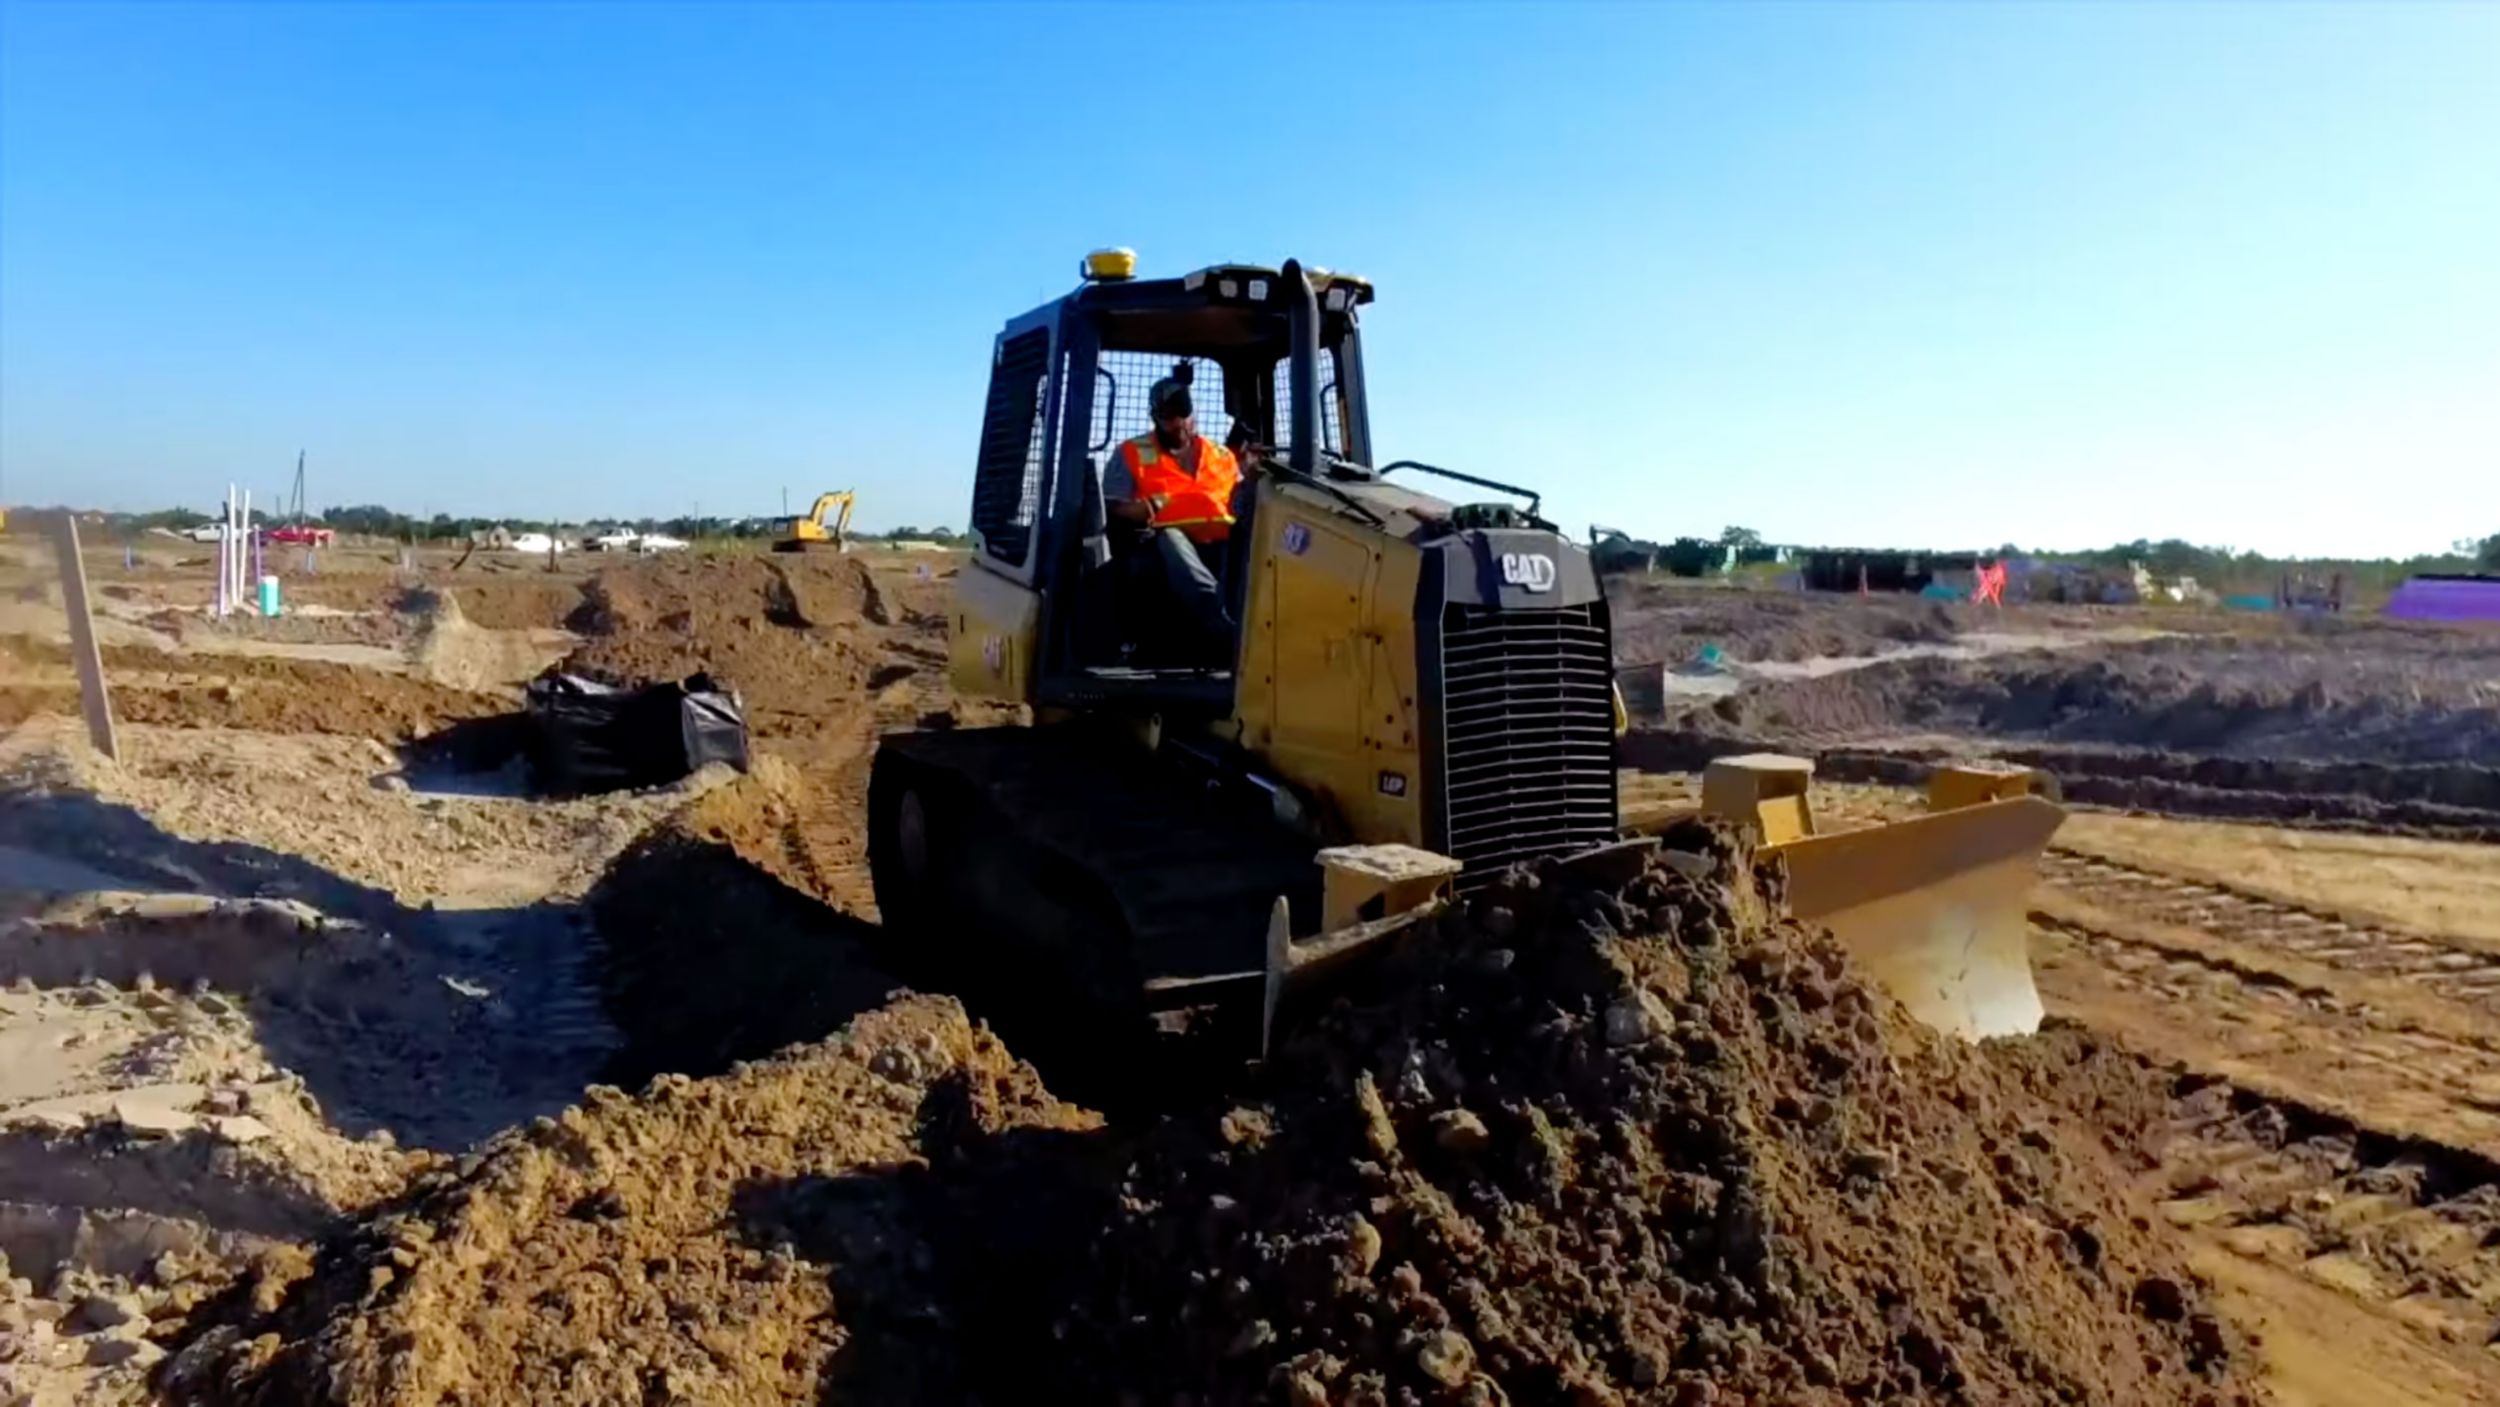 Watch and find out why the Cat D series small dozers are considered the best grade finishers in their class.